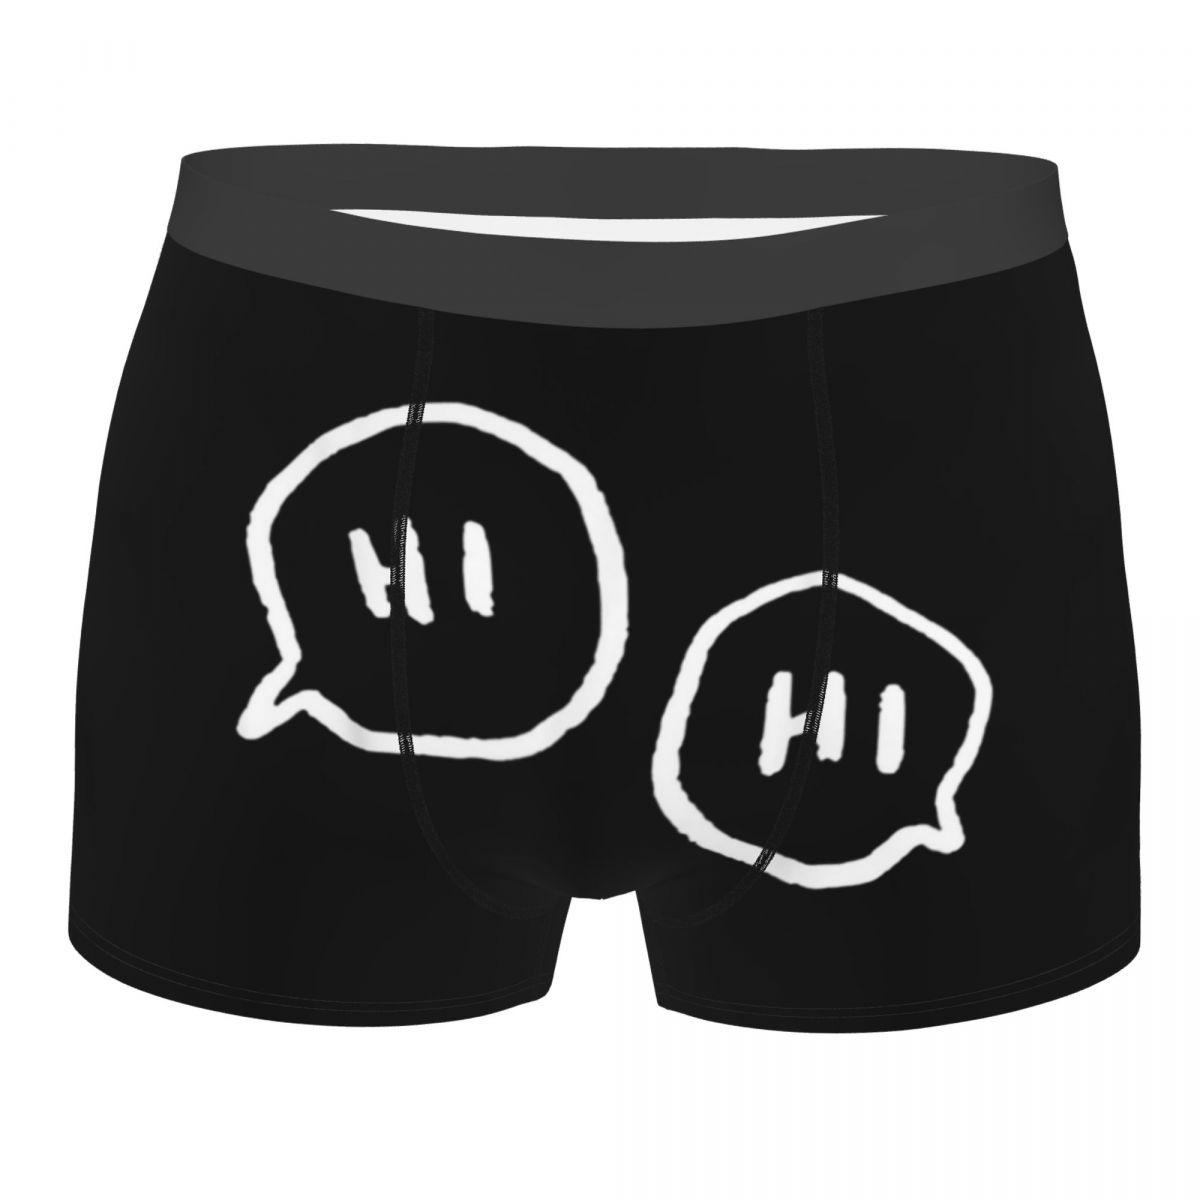 LGBT Heartstoppers Hi Funny Lover Men's Underwear Boxer Briefs Shorts Panties Funny Polyester Underpants for Homme Plus Size